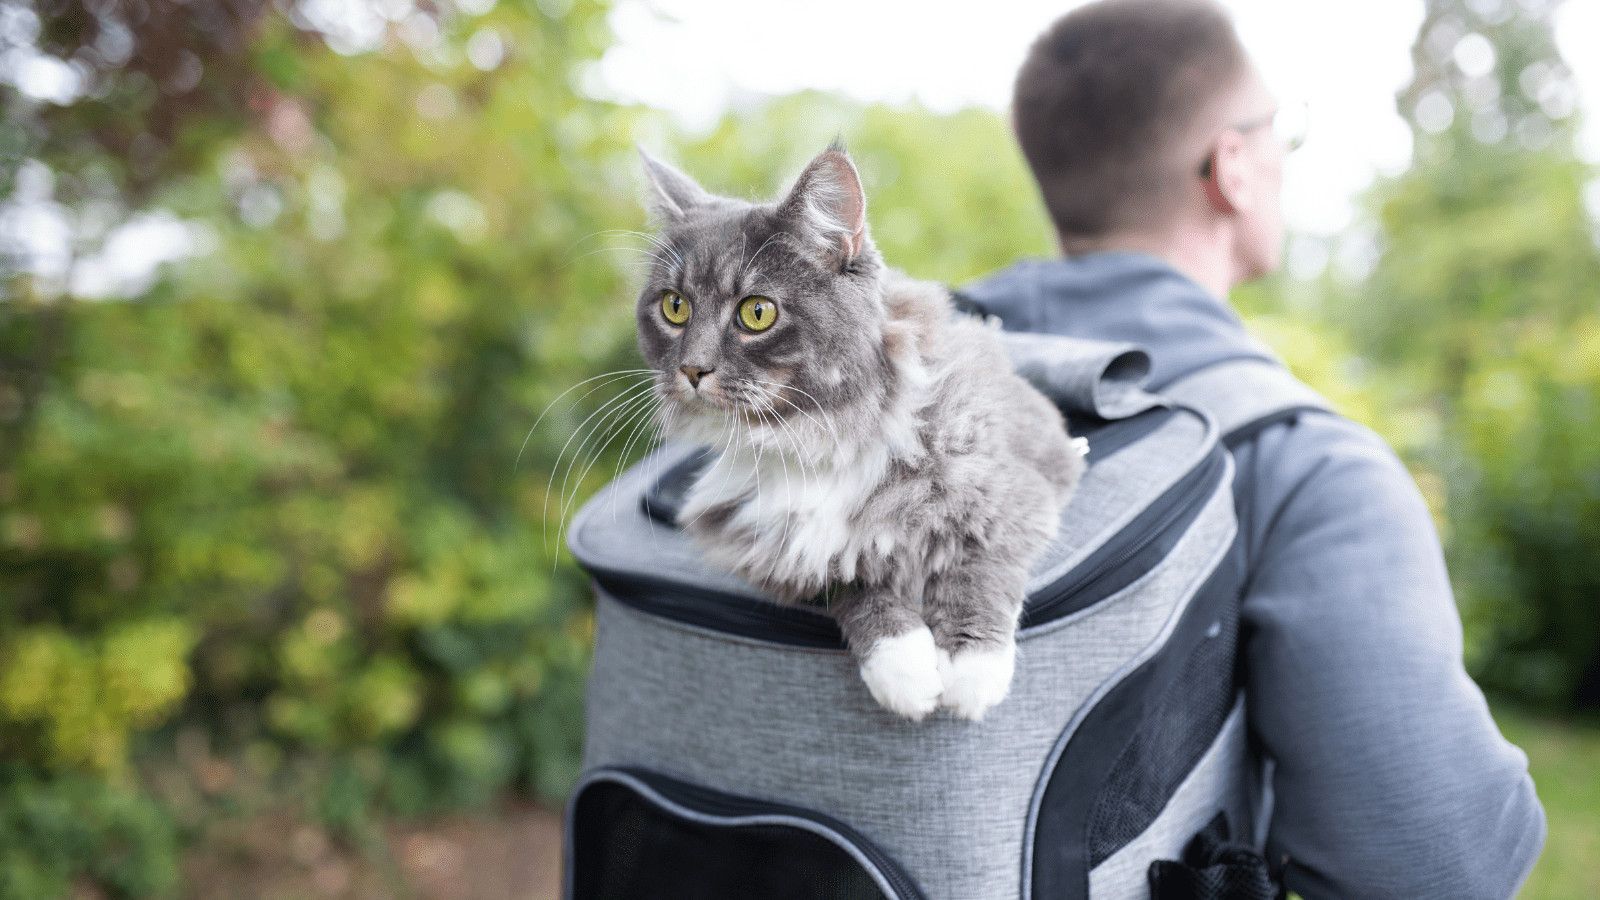 How to hike with your cat